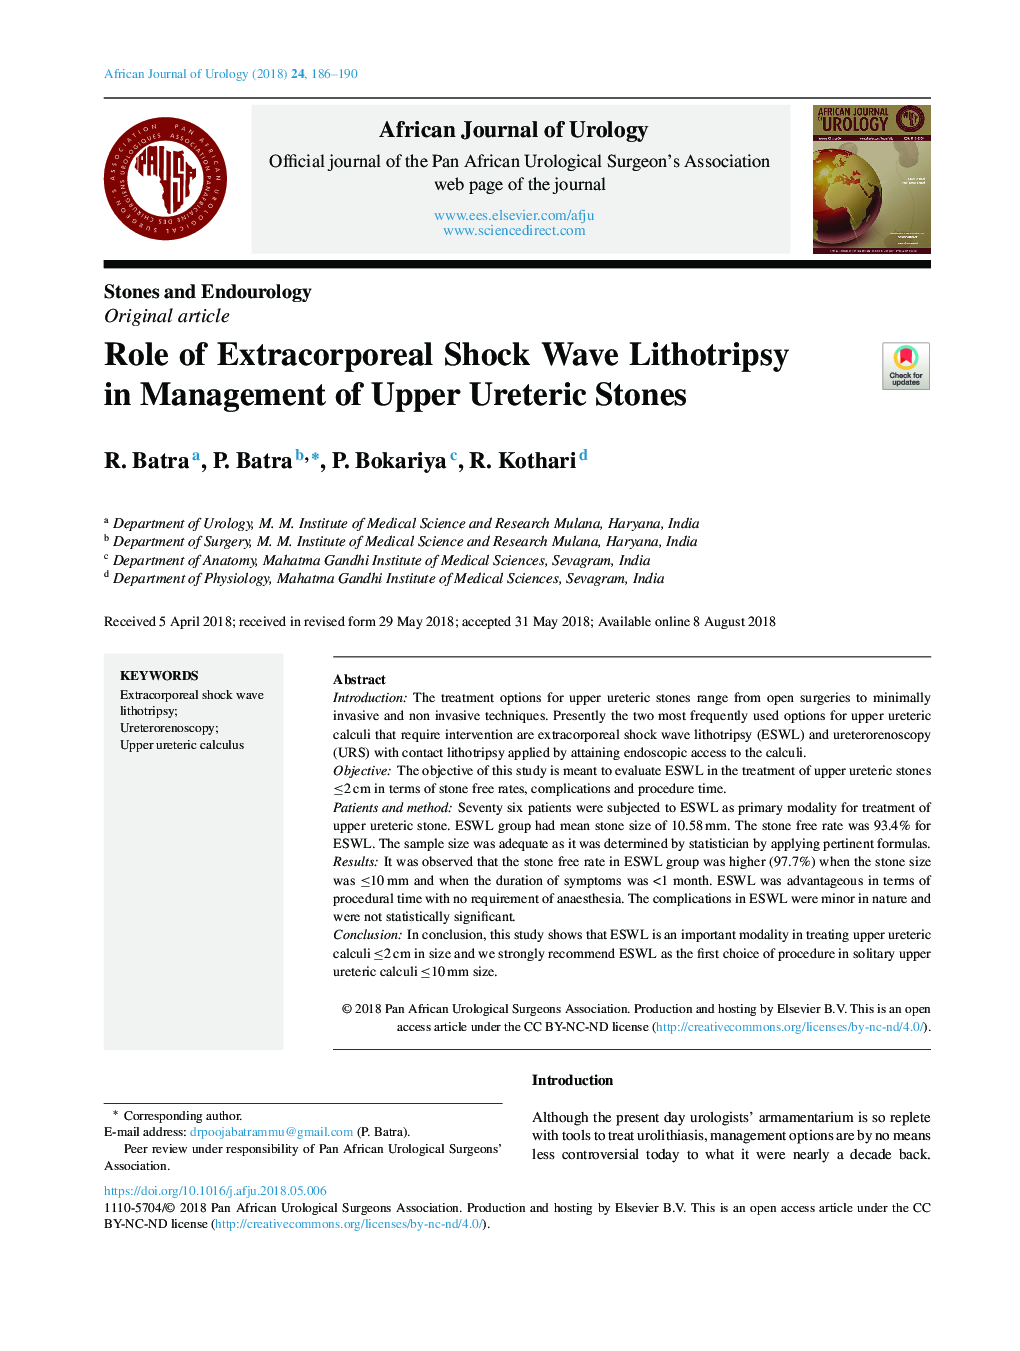 Role of Extracorporeal Shock Wave Lithotripsy in Management of Upper Ureteric Stones